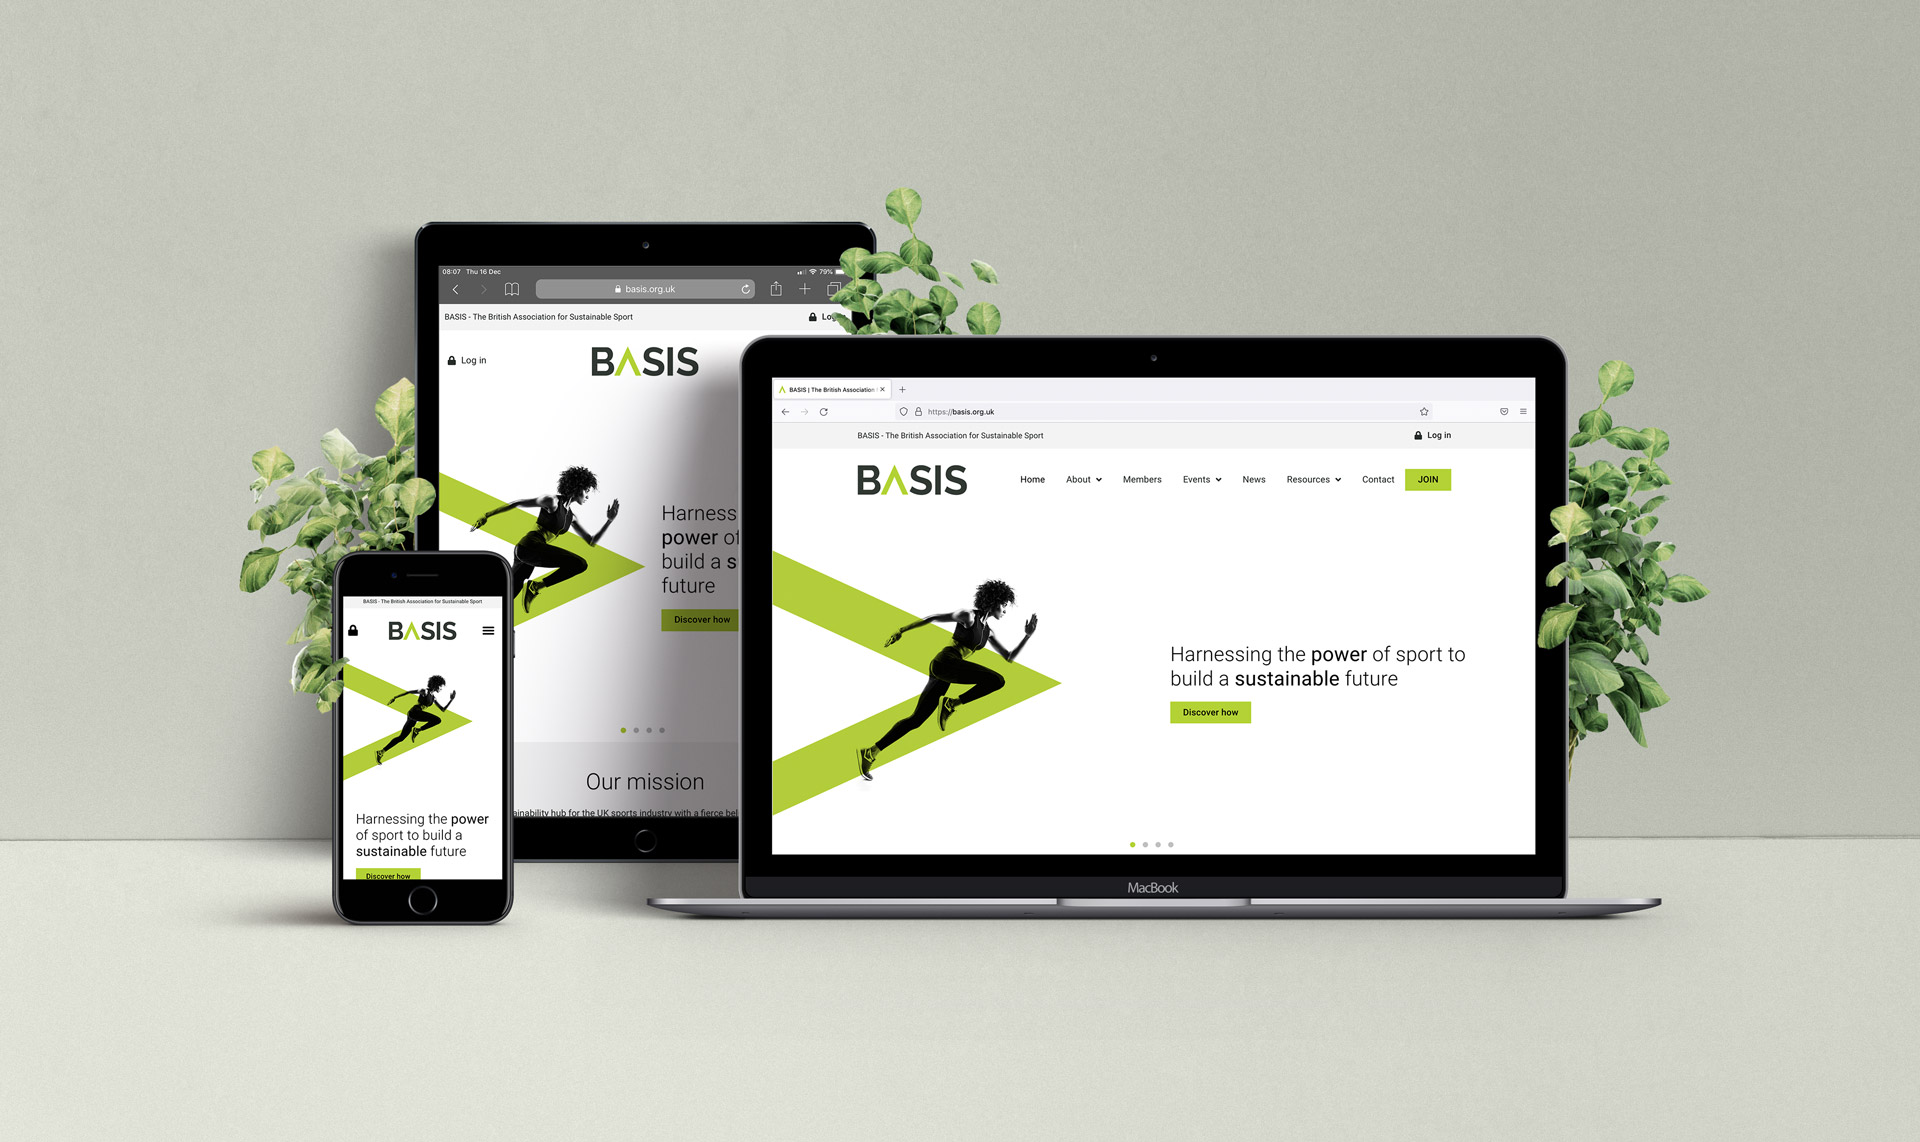 Noble Digital created a new responsive Website for BASIS - the British Association for Sustainable Sport